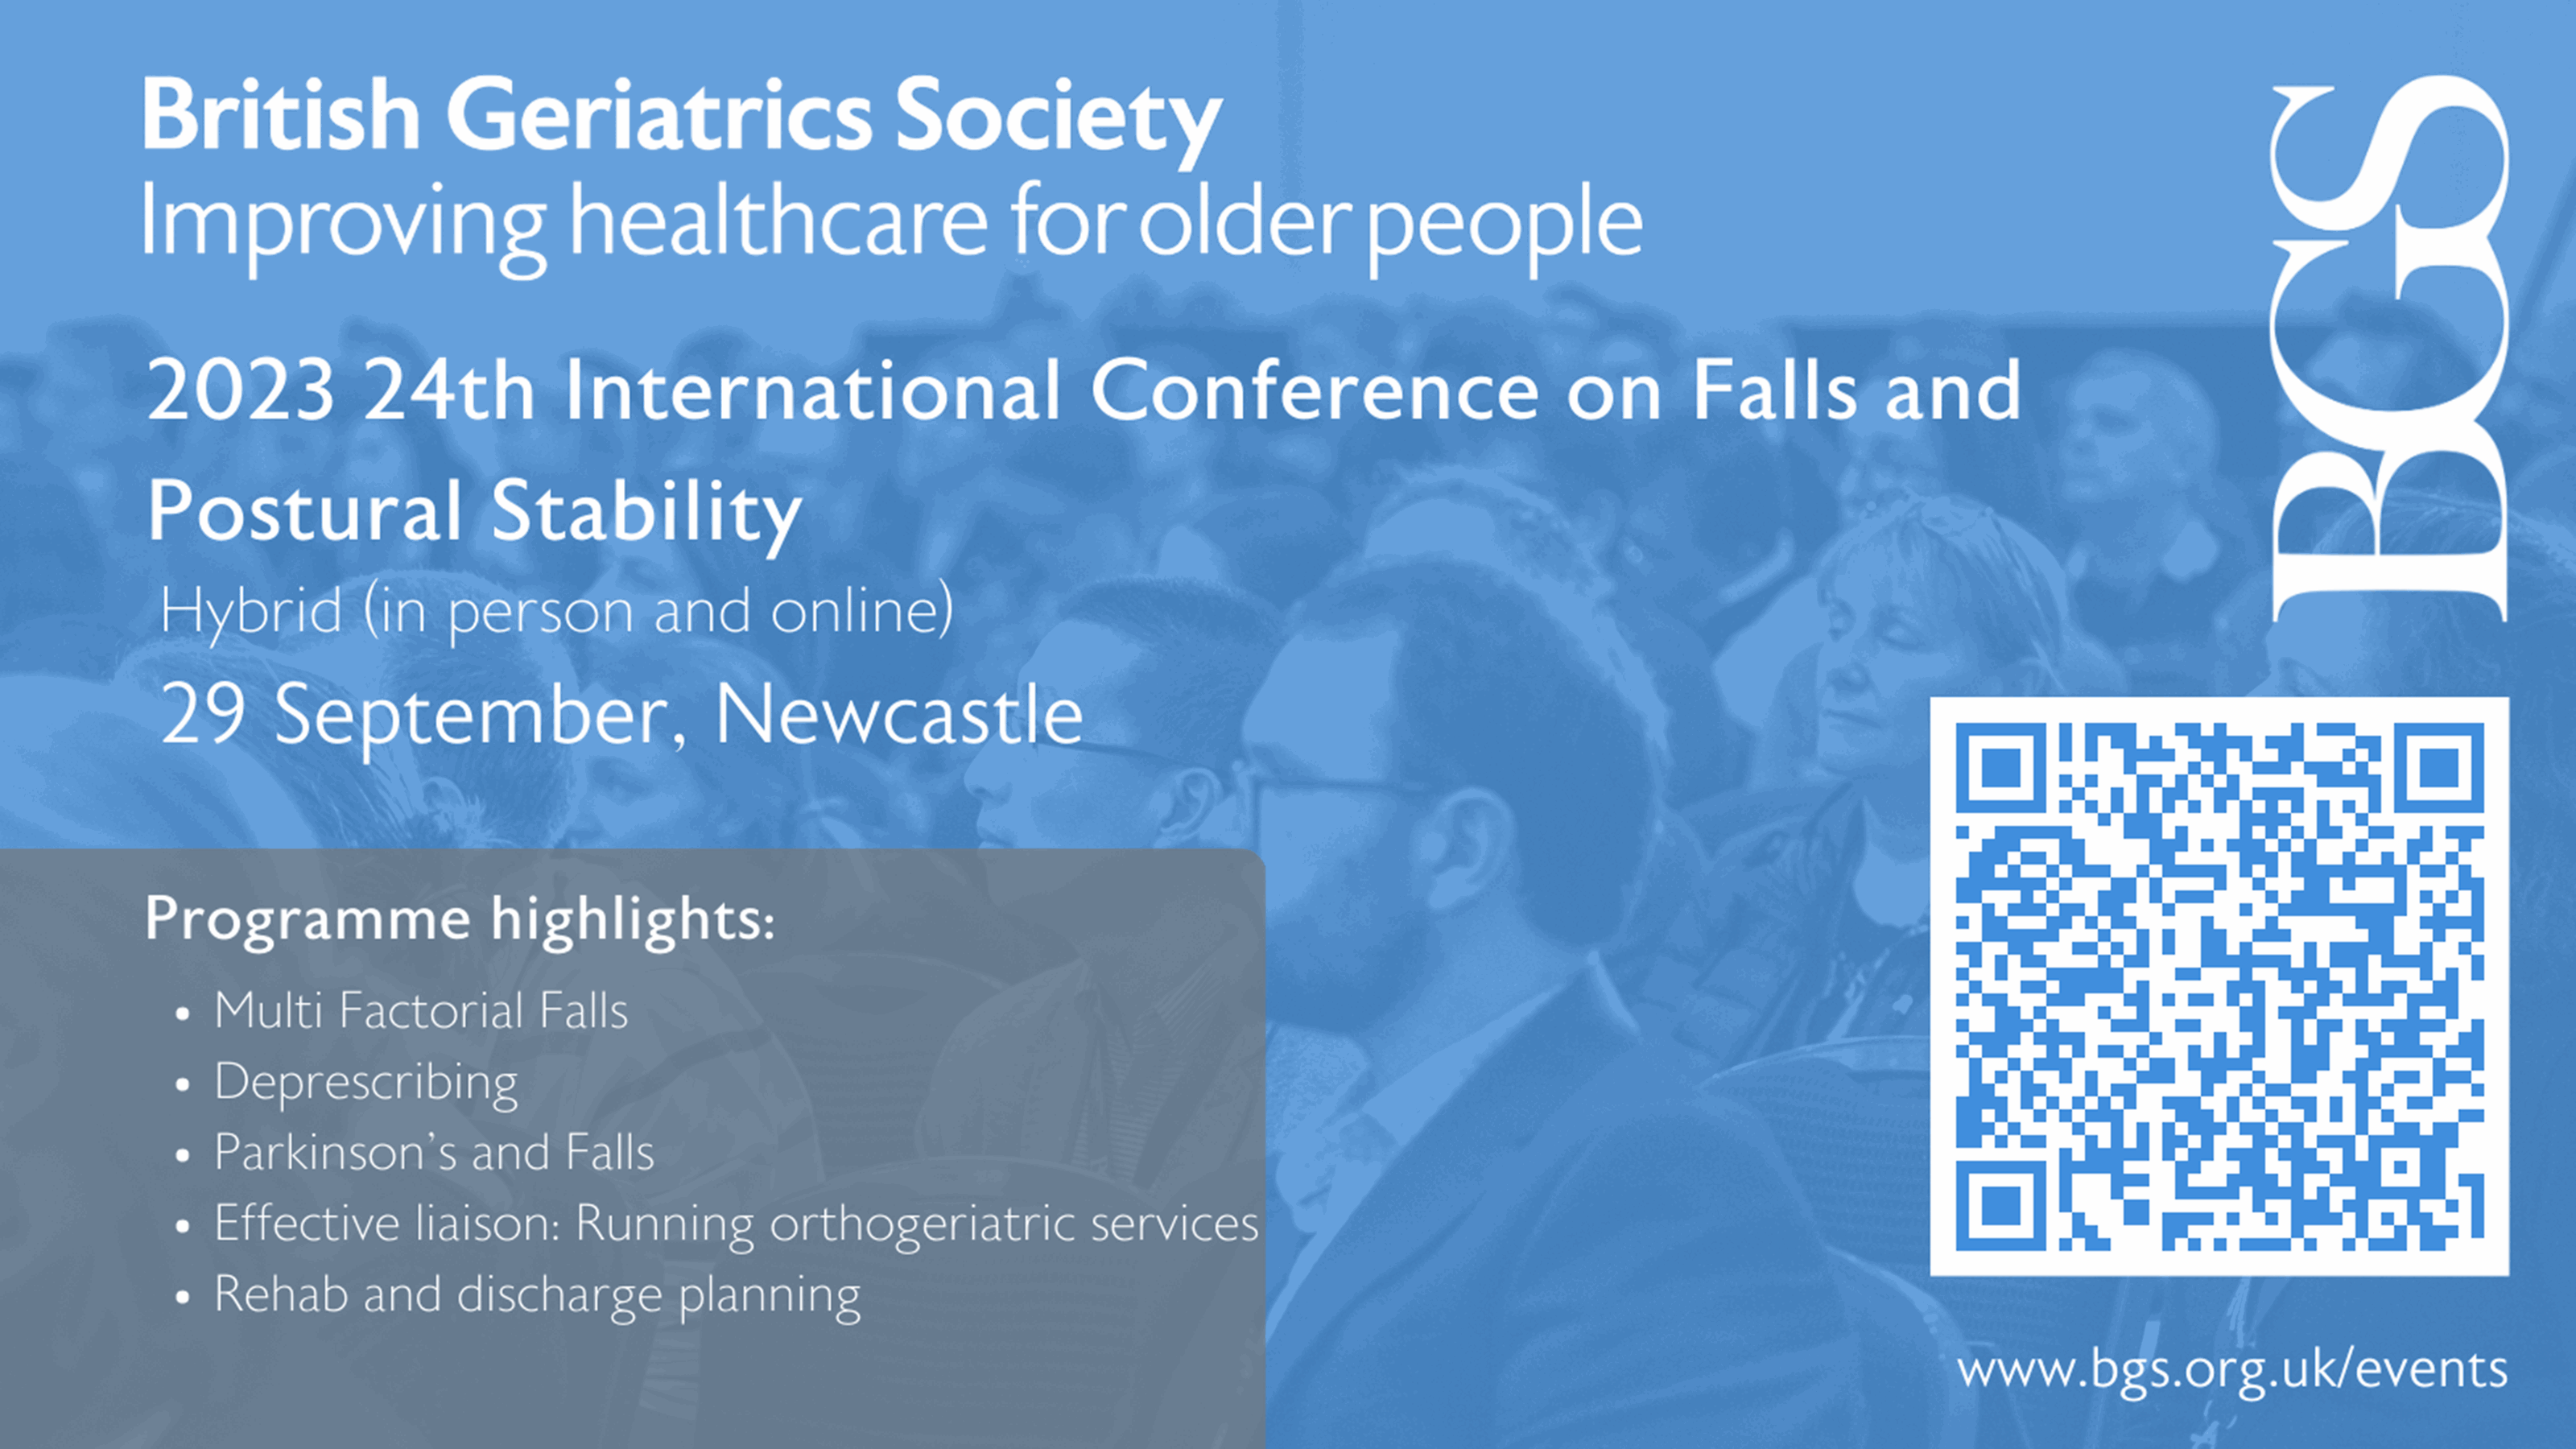 The British Geriatrics Society 2023 24Th International Conference On Falls And Postural Stability Banner